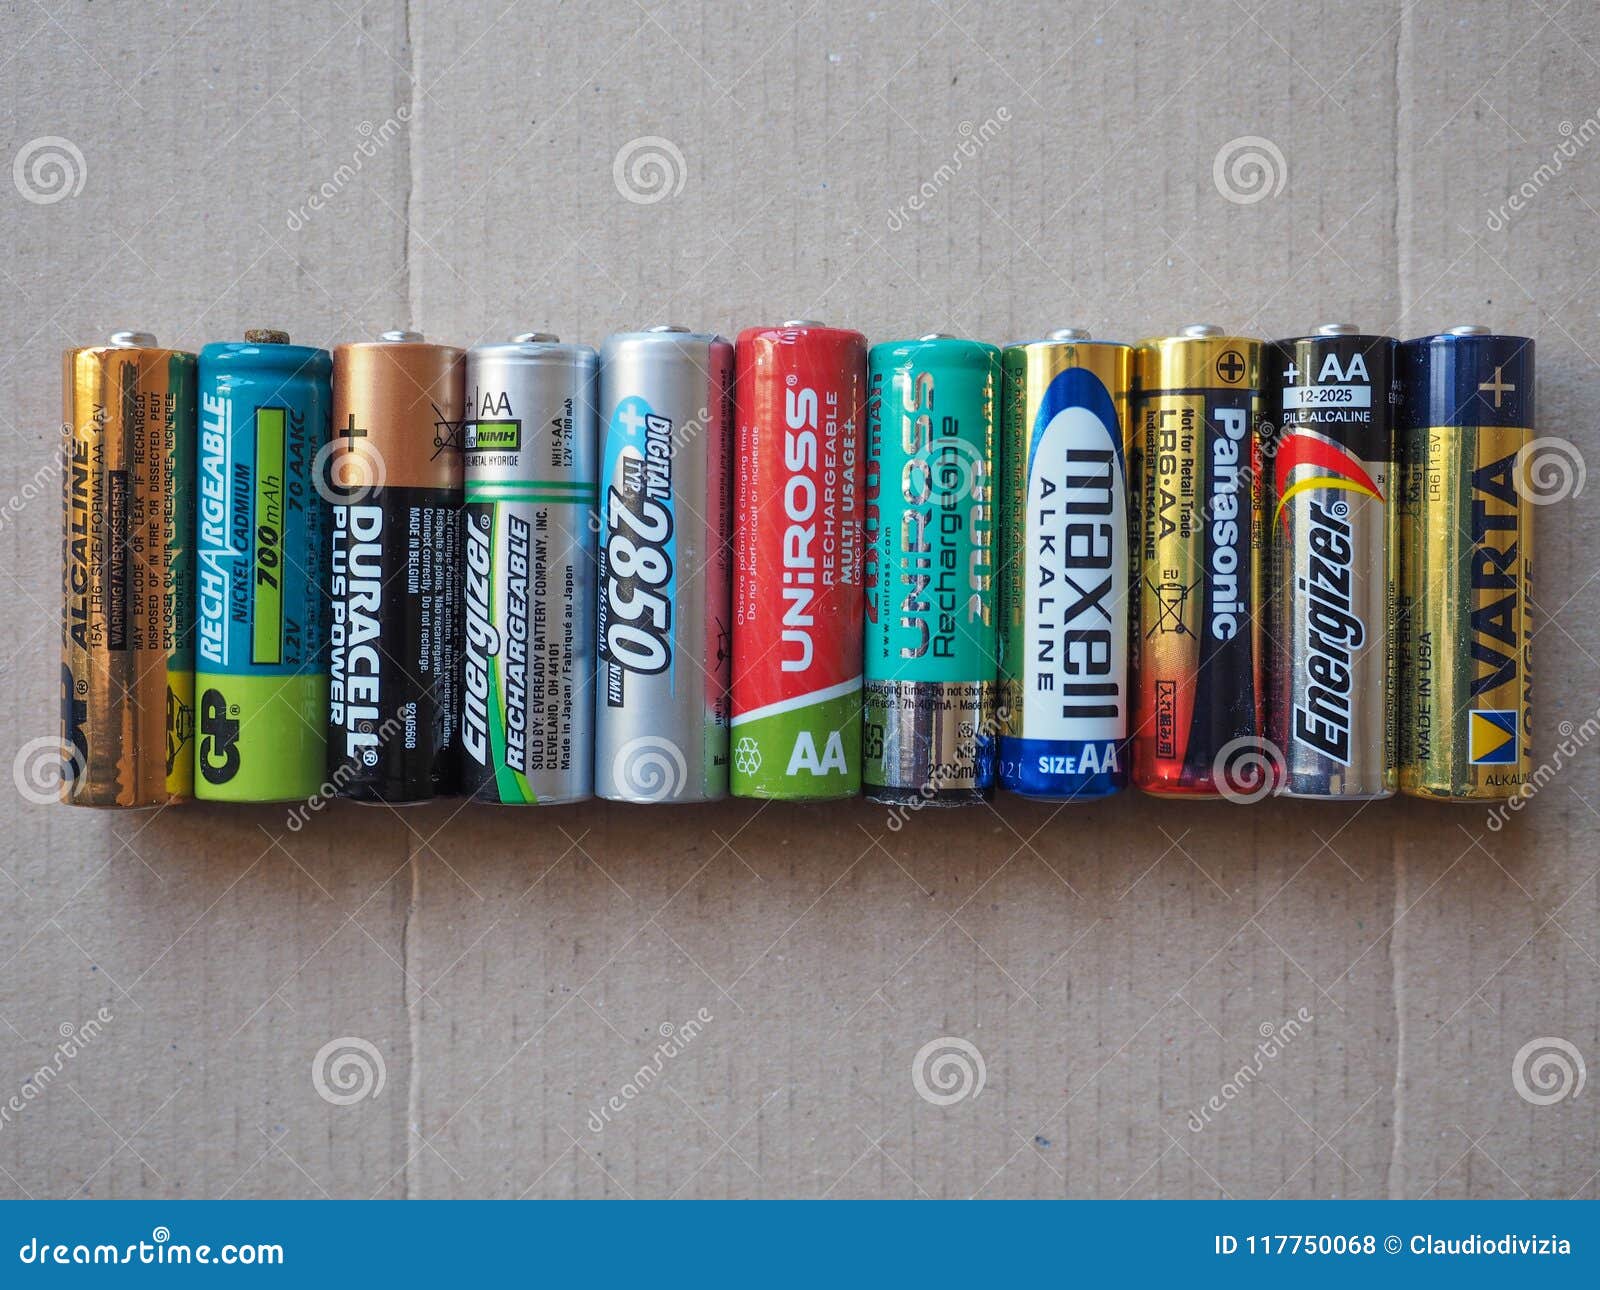 Aa Batteries Of Many Different Brands Editorial Stock Photo Image Of